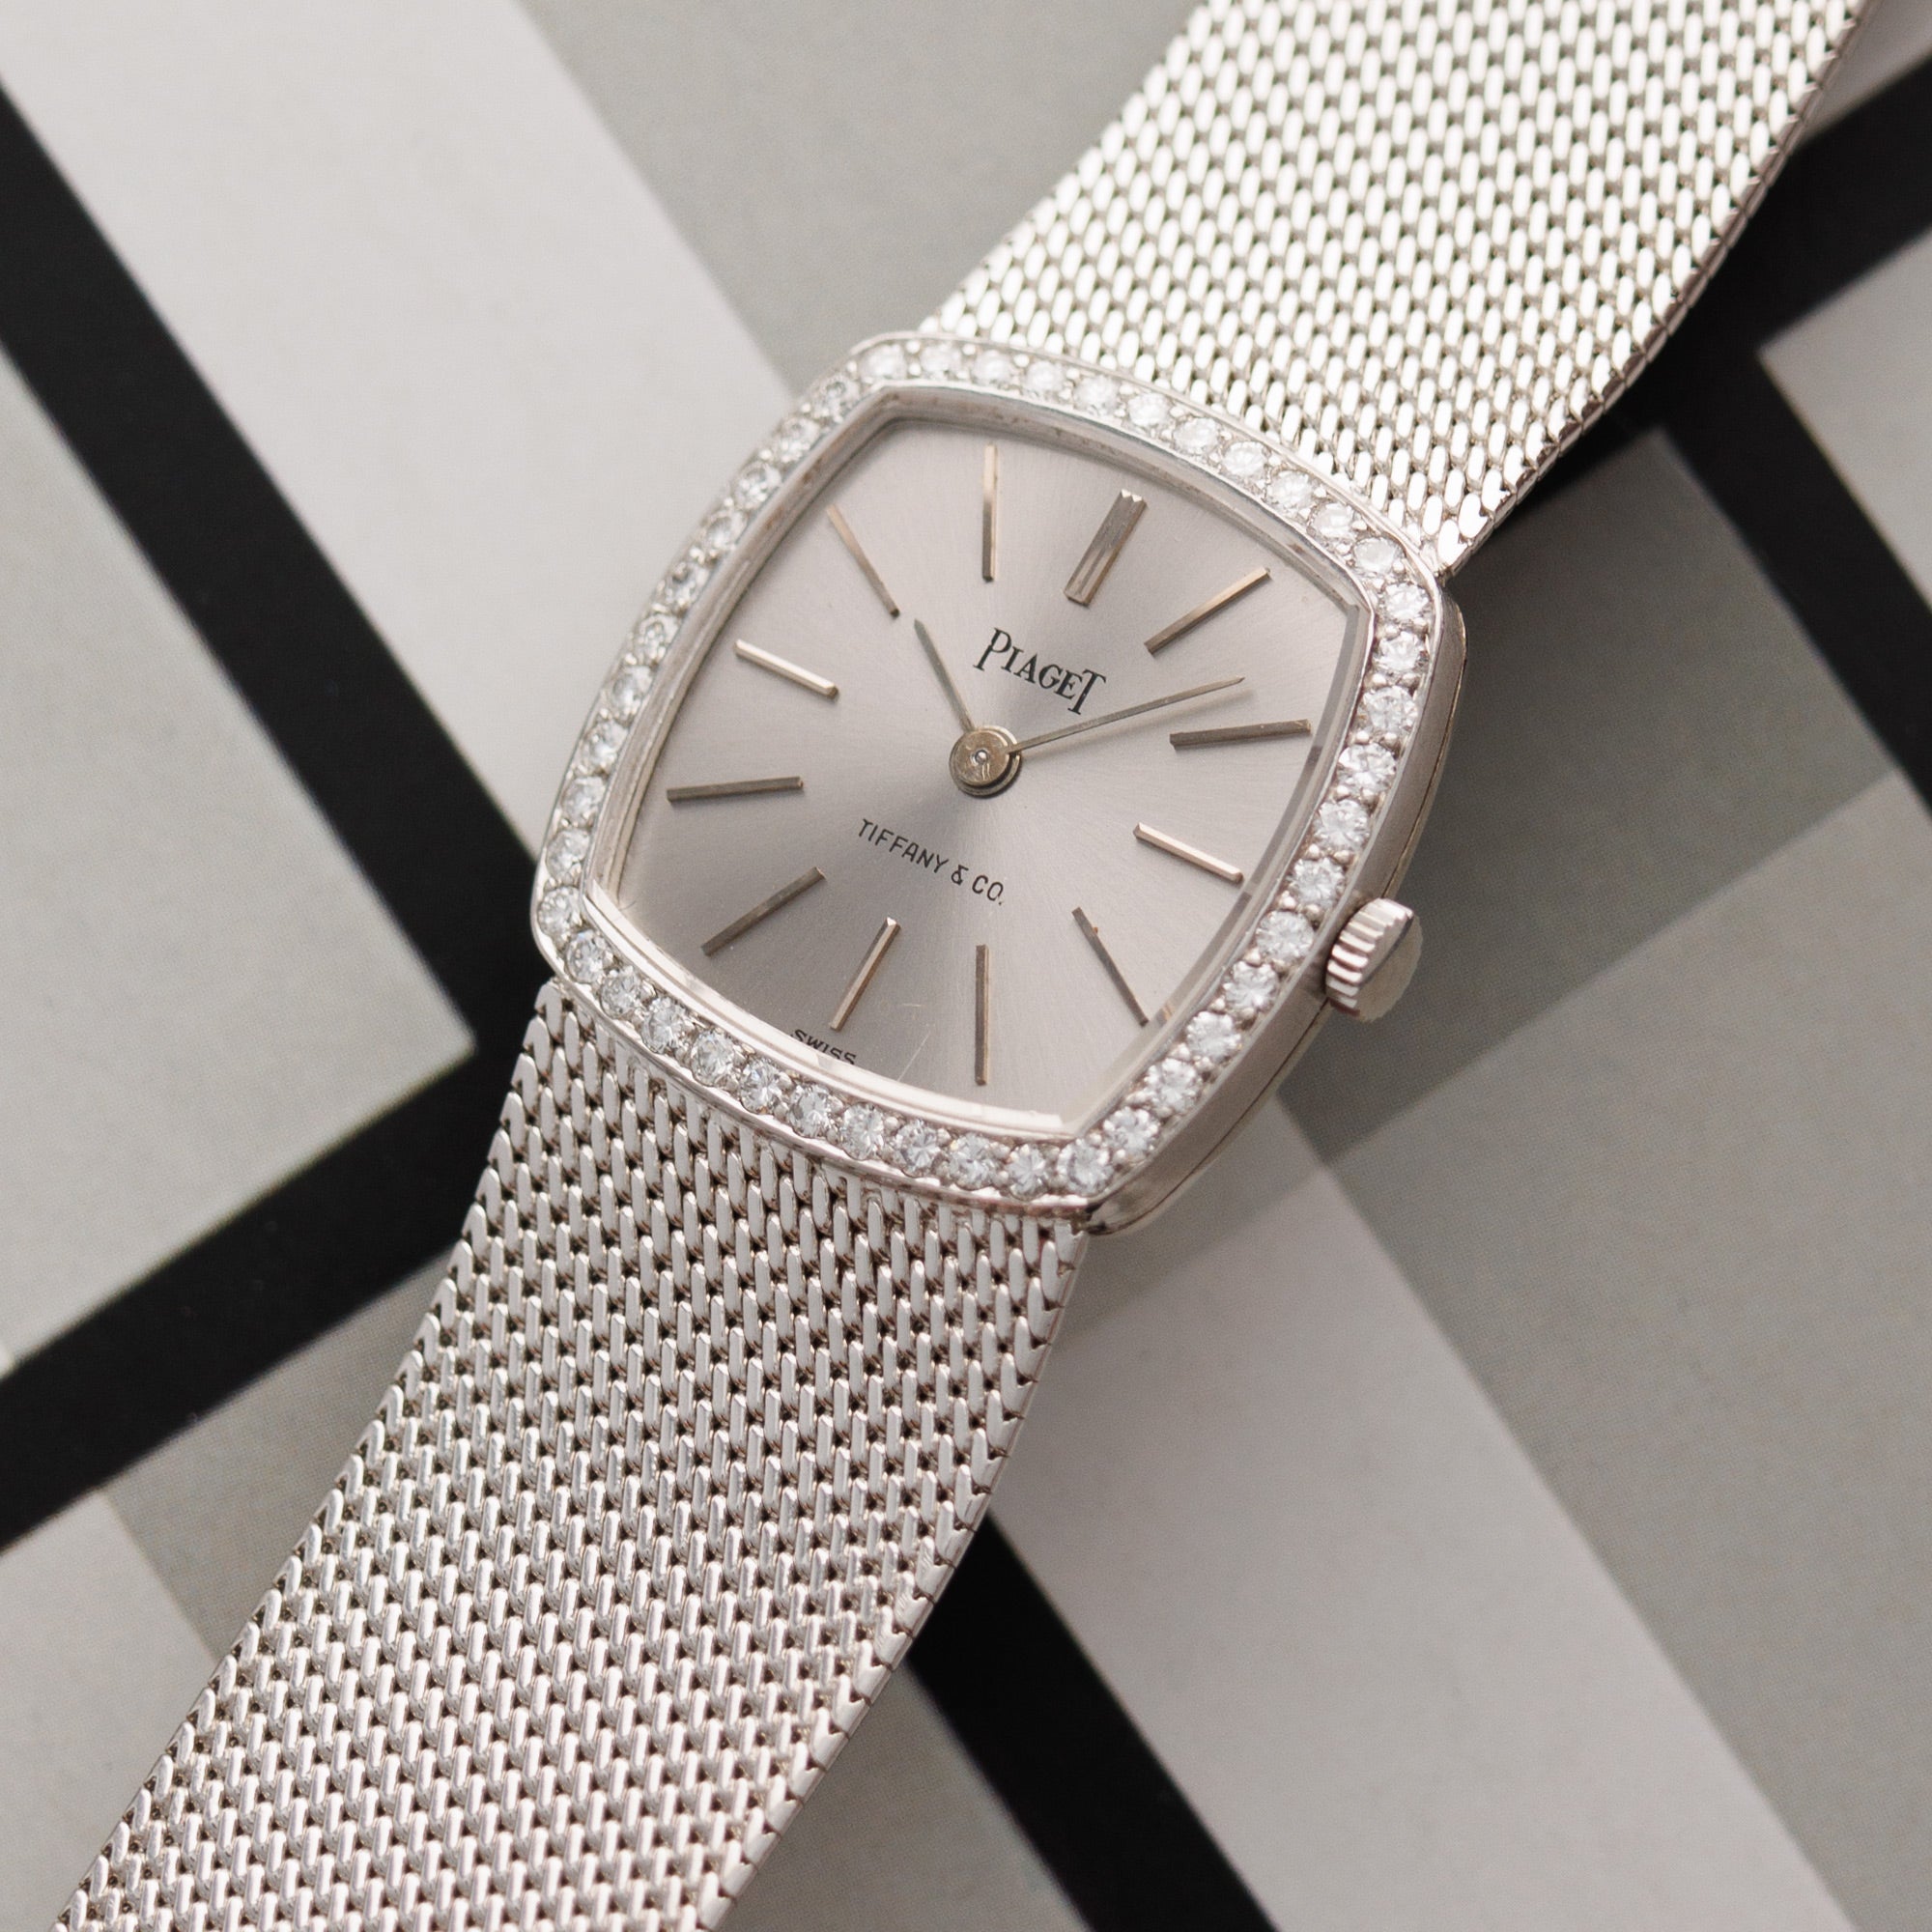 Piaget - Piaget White Gold Diamond Watch, Retailed by Tiffany & Co. - The Keystone Watches